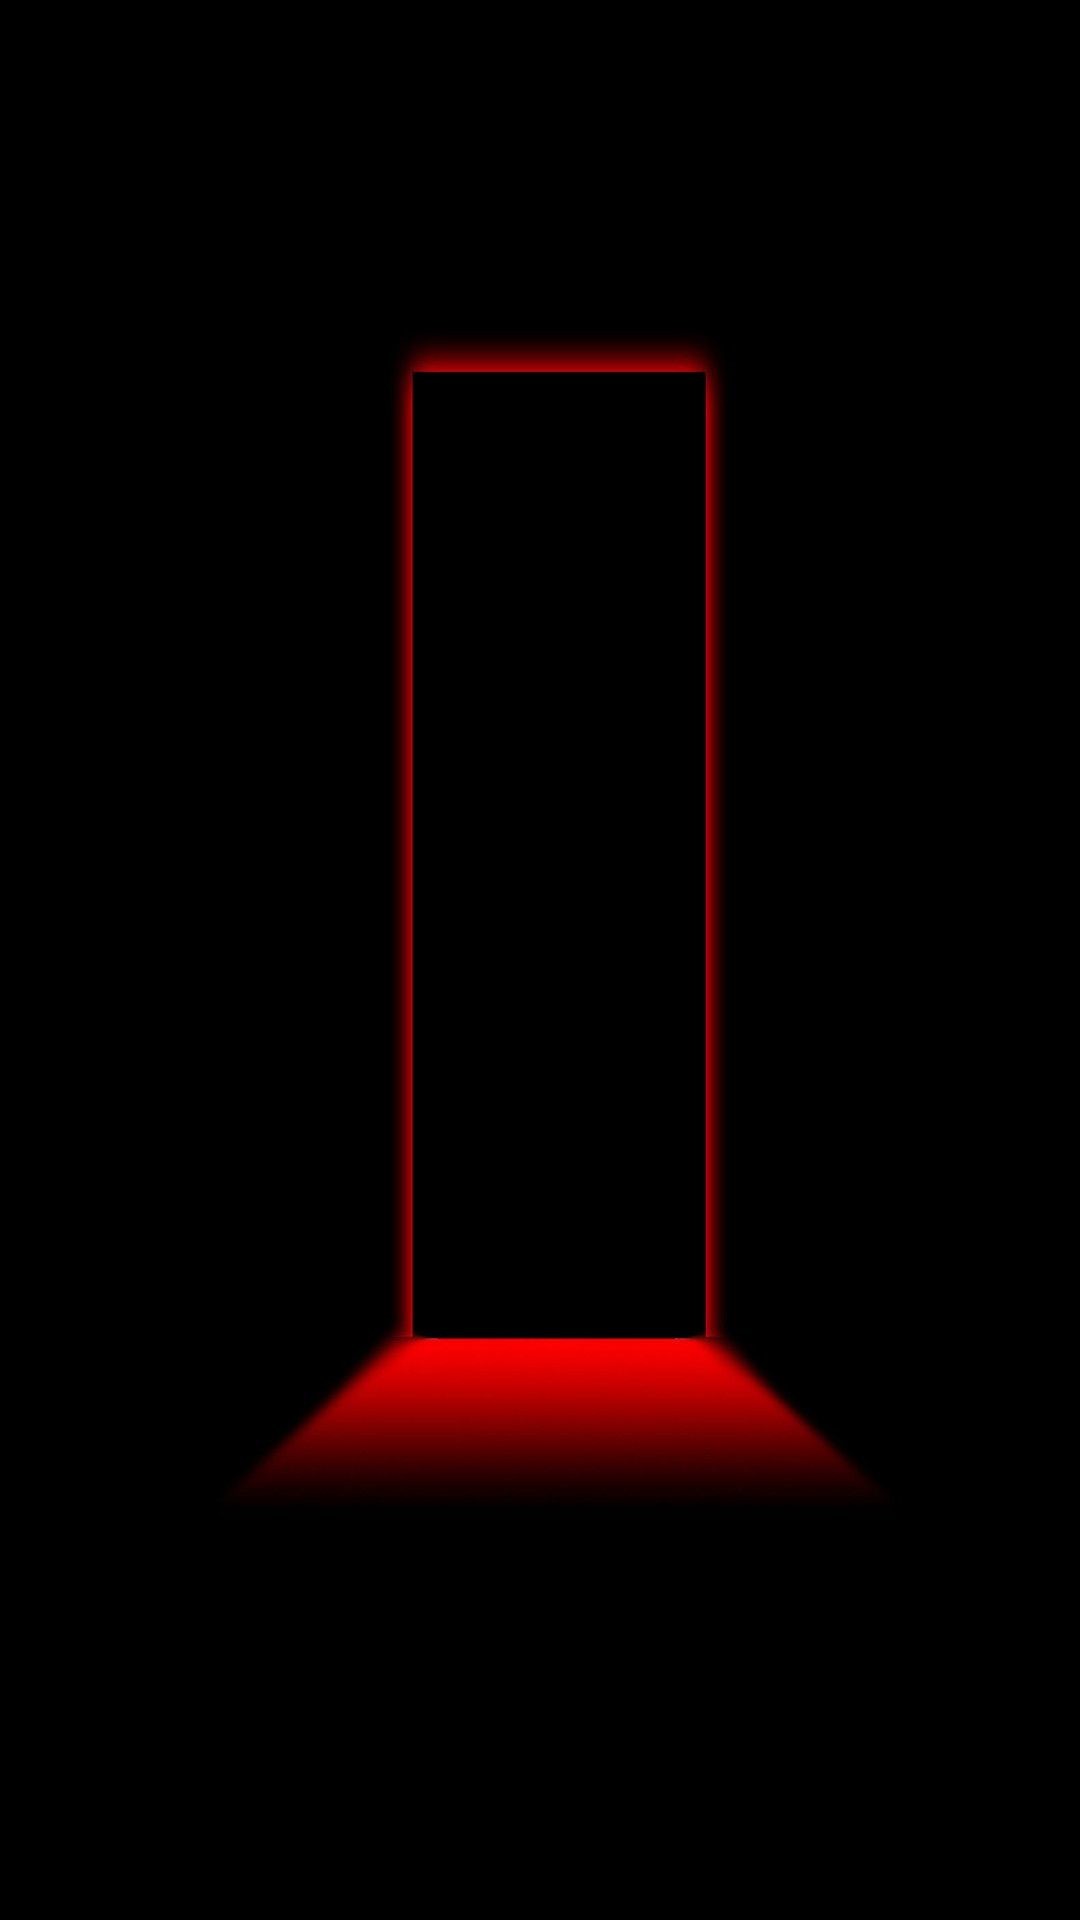 1080x1920 3D Black and Red iPhone Wallpaper - Best iPhone Wallpaper